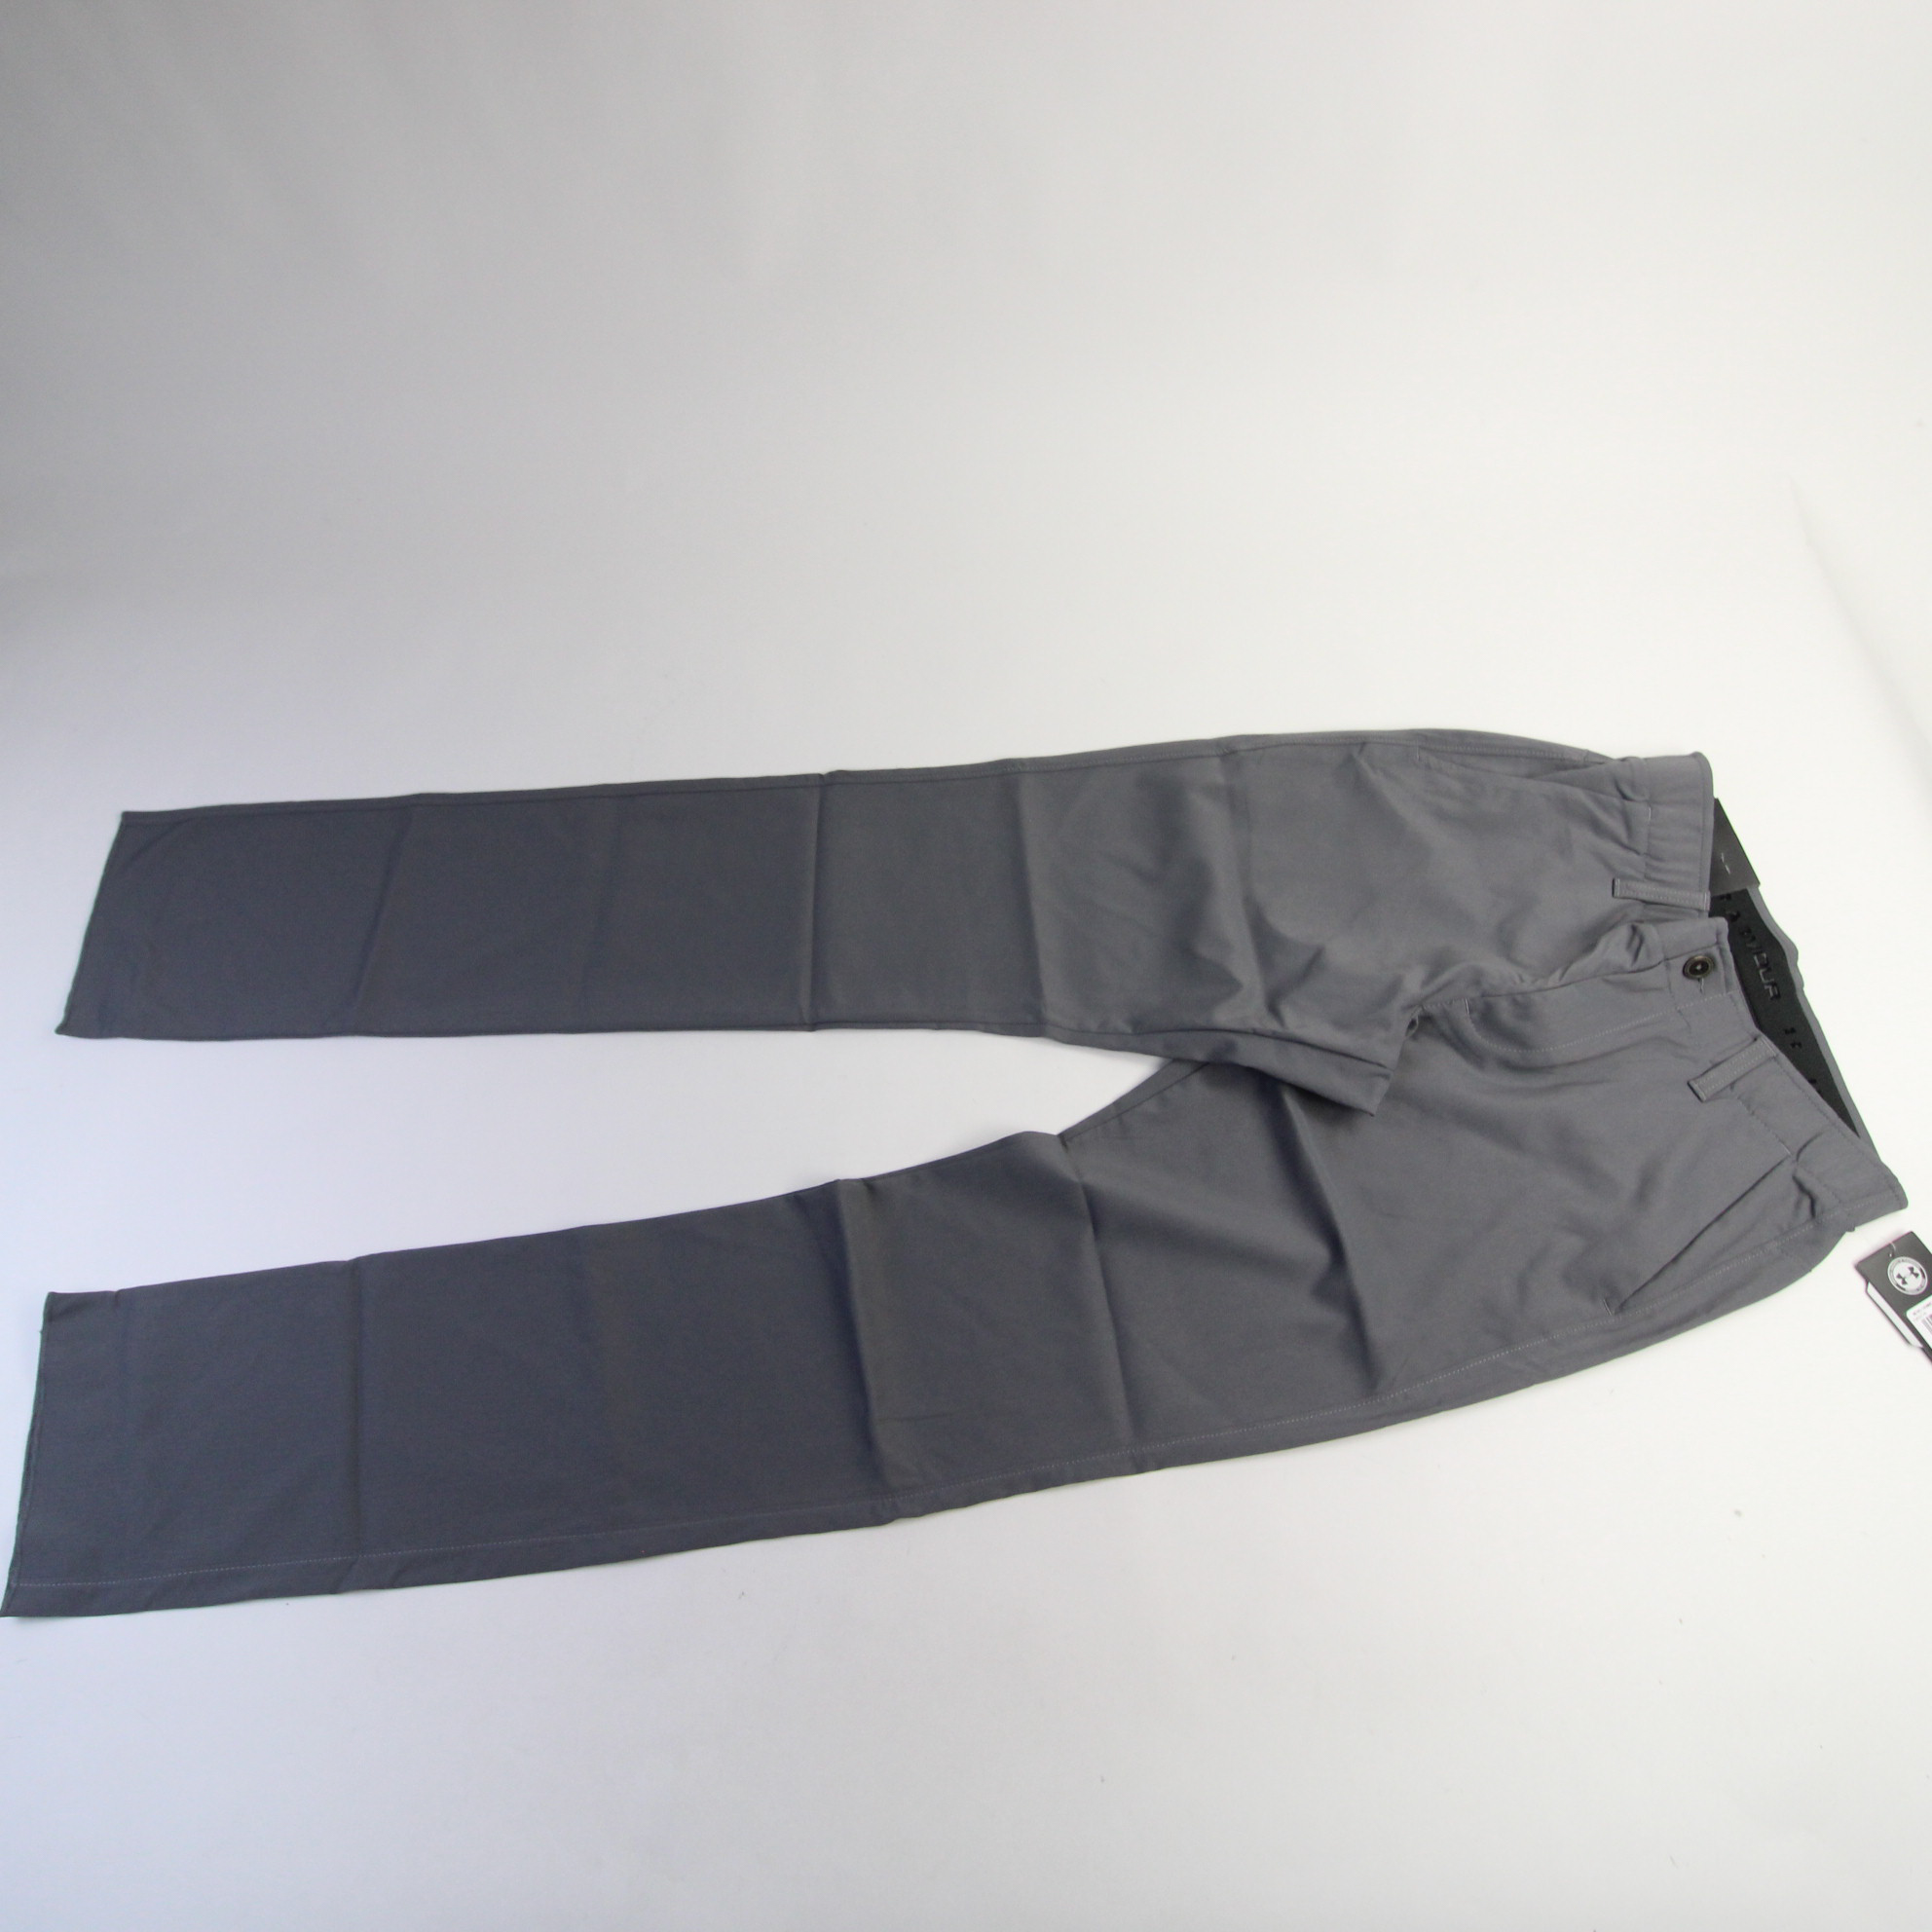 Under Armour HeatGear Dress Pants Men's 32 34 38 40 42 50 Gray New with Tags